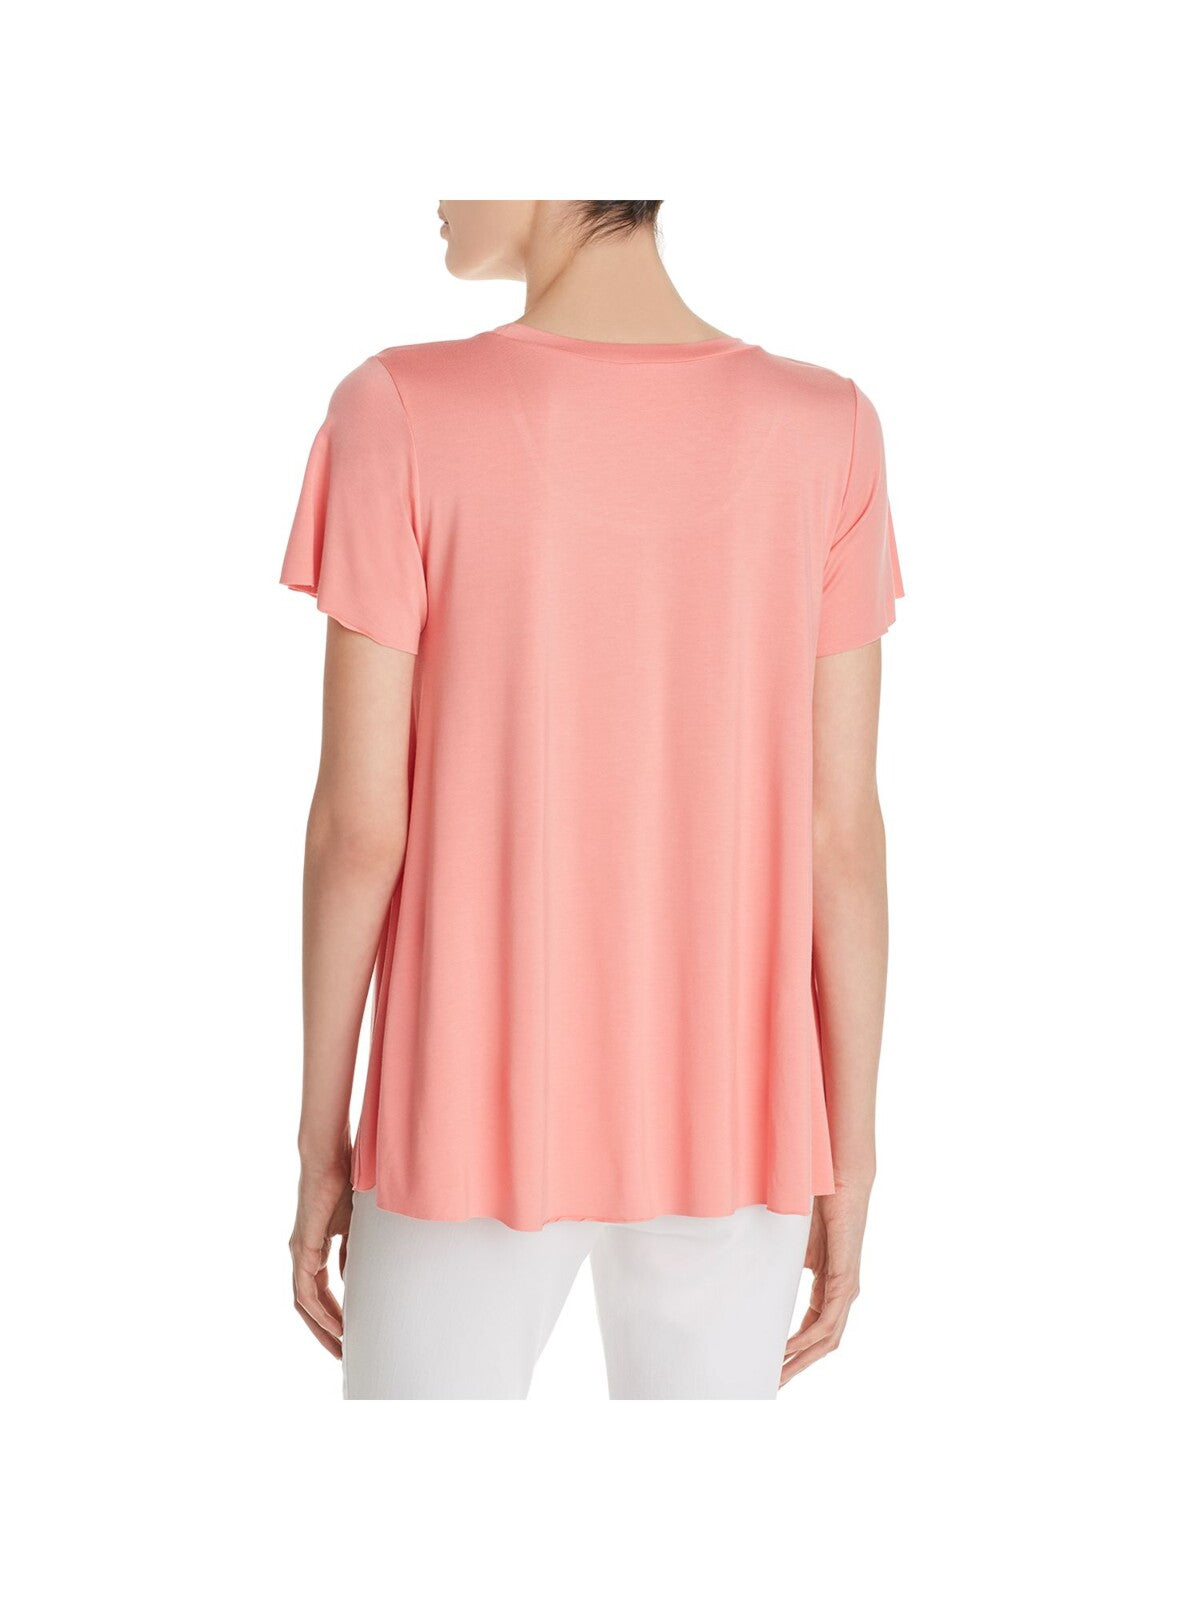 NOM Womens Coral Stretch Short Sleeve Scoop Neck T-Shirt Maternity XS